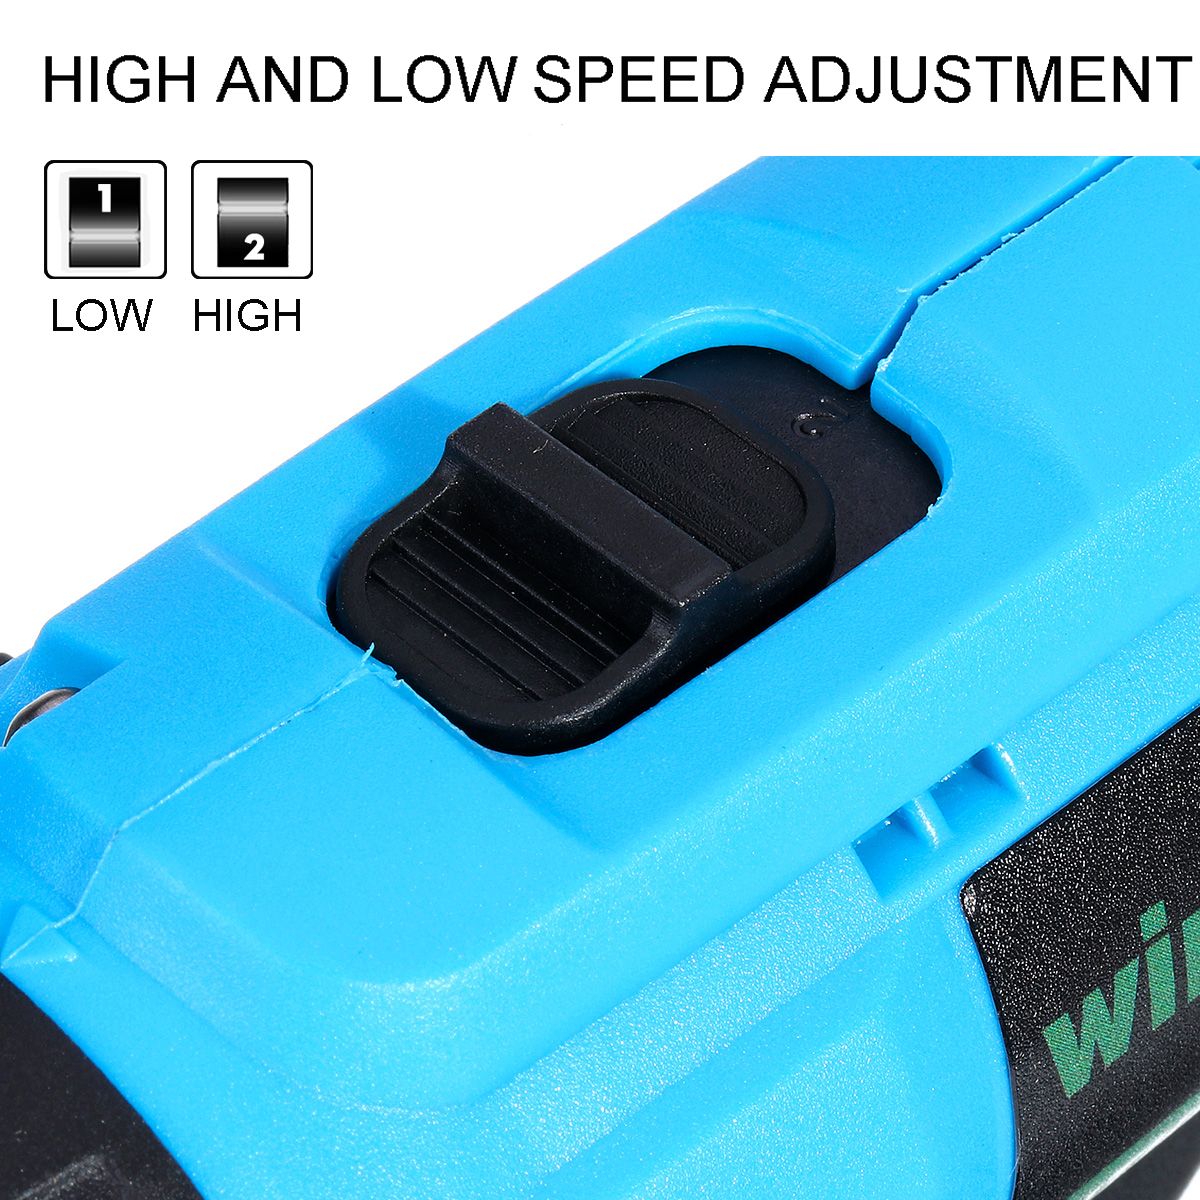 48VF-3000mAh-Electric-Impact-Drill-Rechargeable-Power-Screwdriver-251-Torque-W-1-or-2-Li-ion-Battery-1515342